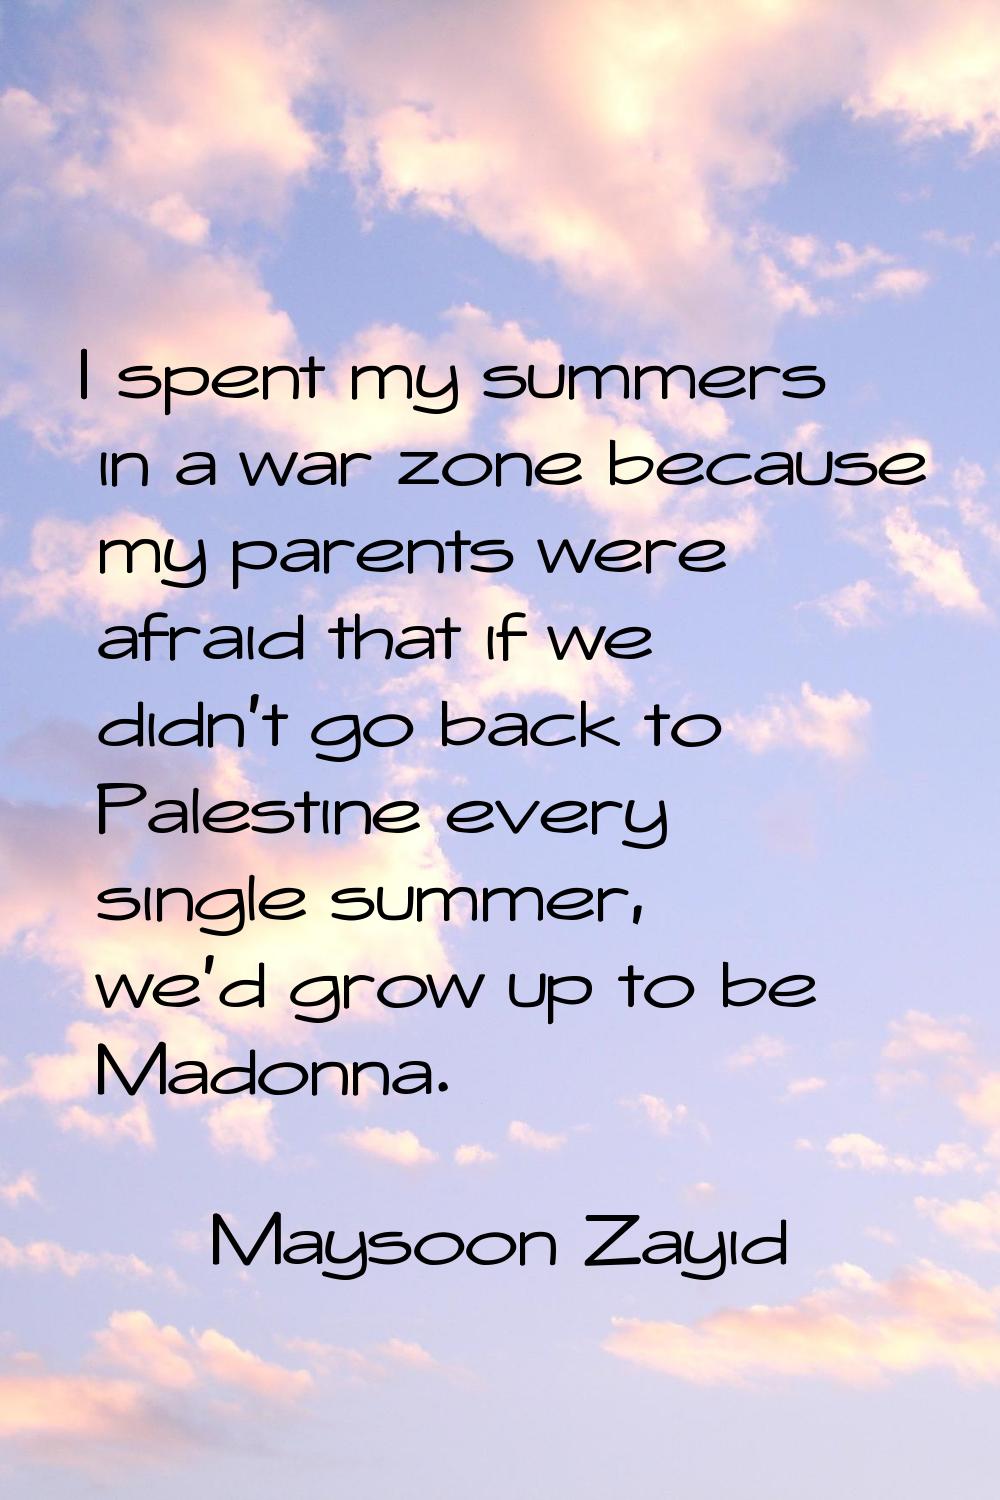 I spent my summers in a war zone because my parents were afraid that if we didn't go back to Palest